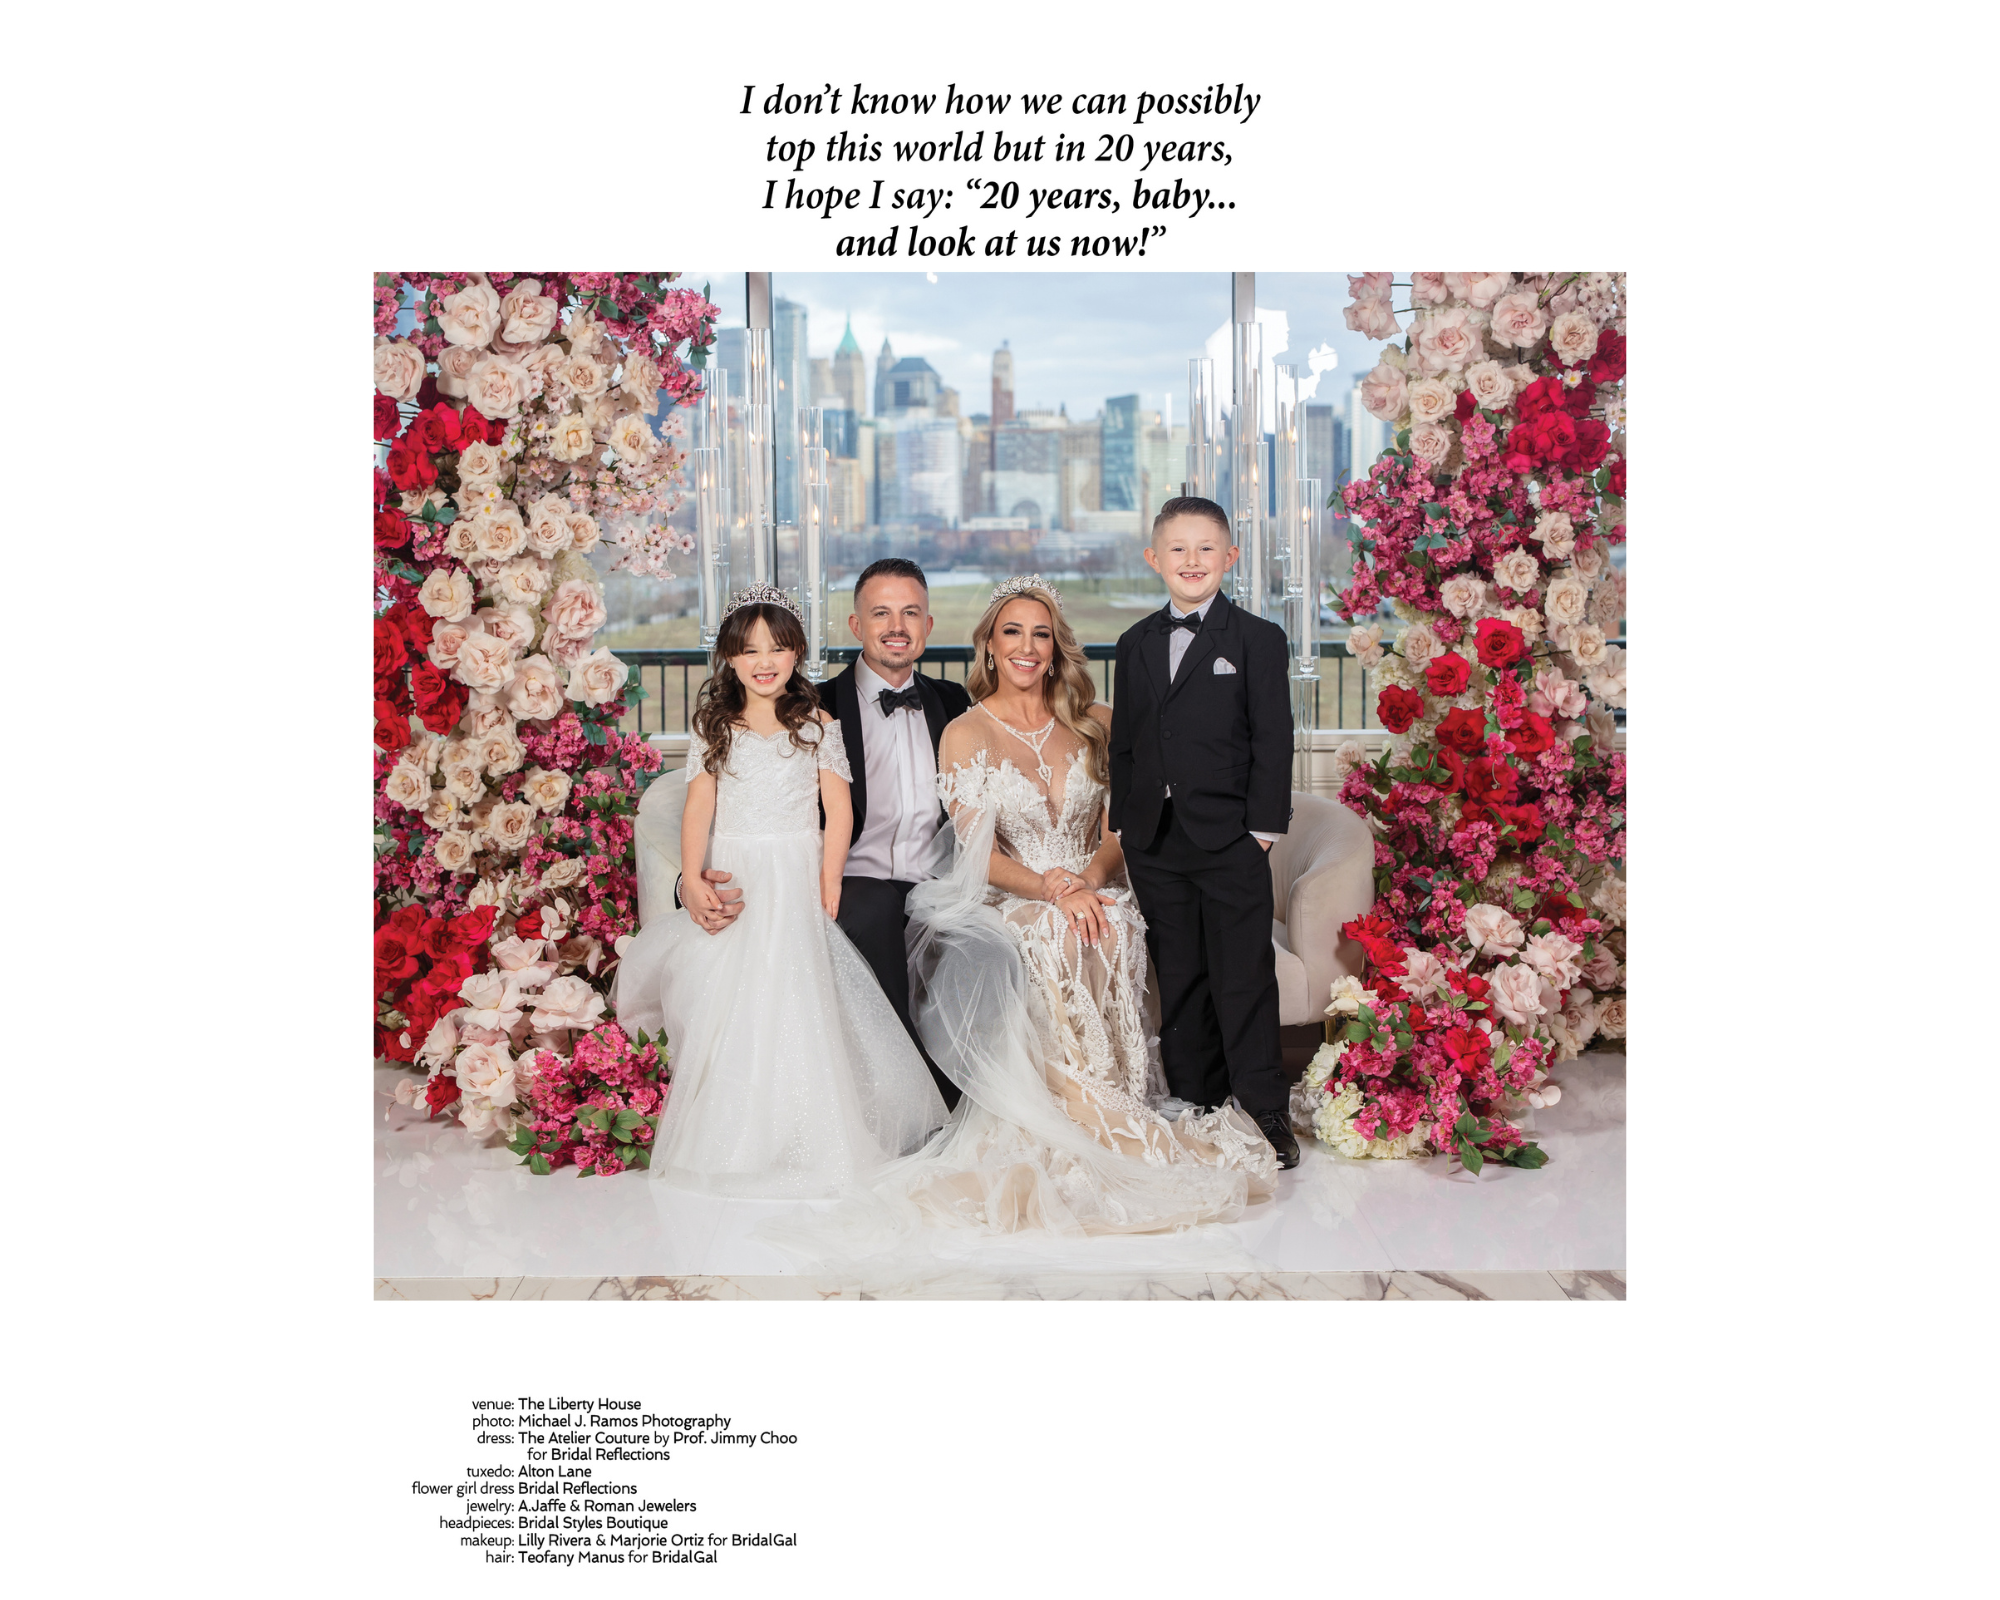  RHONJ Star Danielle Cabral  and her husband Nate's 10th-anniversary shoot for Sophisticated weddings! Danelle’s Swarovski crystal headband via Bridal Styles Boutique and her wedding gown via Bridal Reflections. 